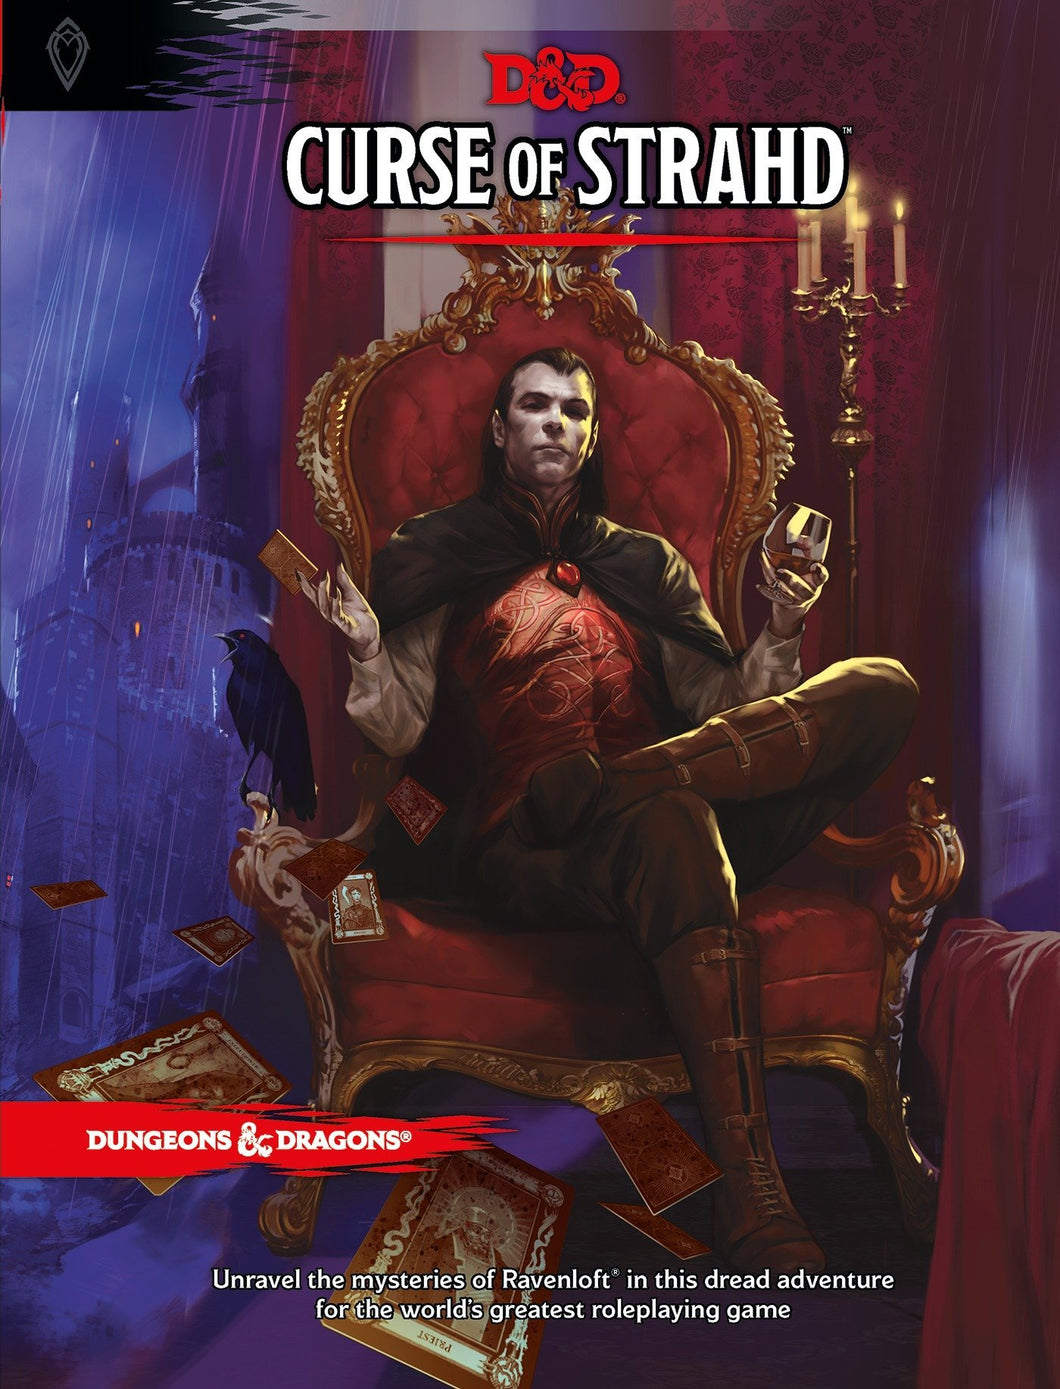 Dungeons & Dragons (D&D) : 5th Edition Curse of Strahd